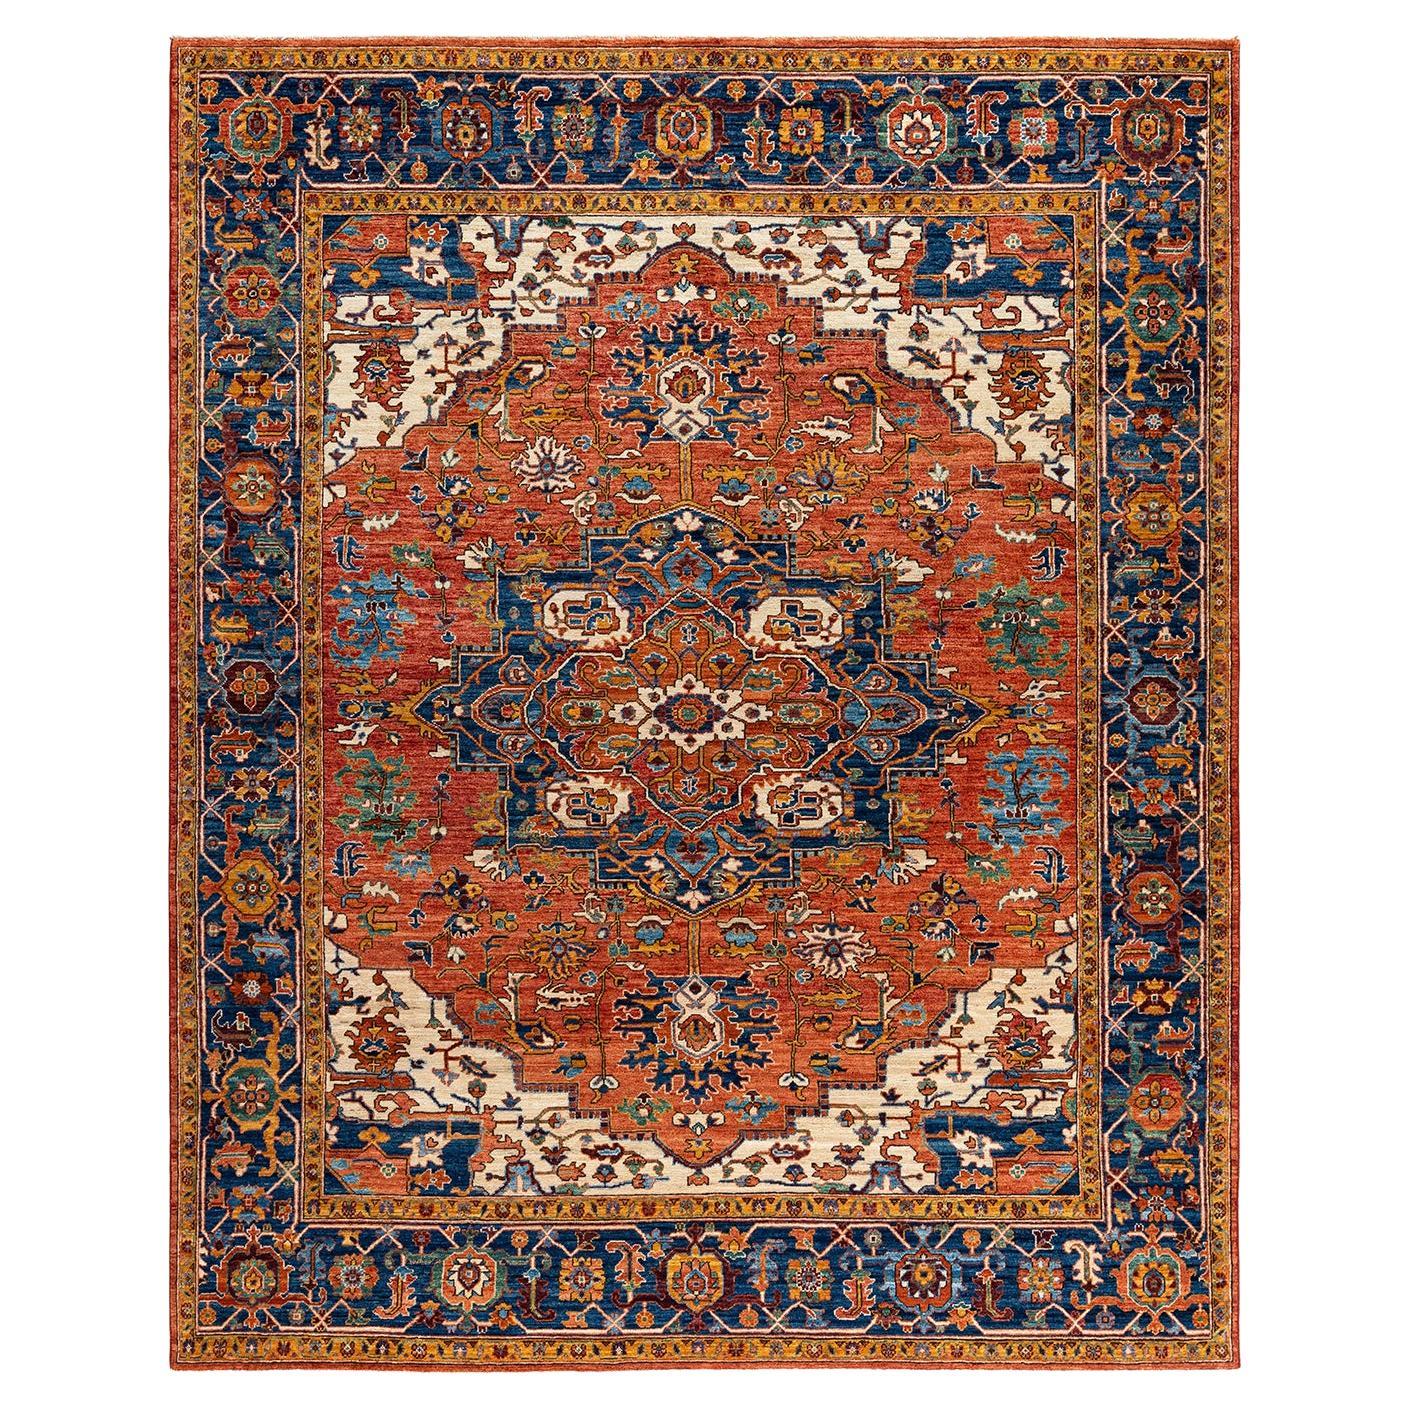  Traditional Serapi Hand Knotted Wool Red Area Rug